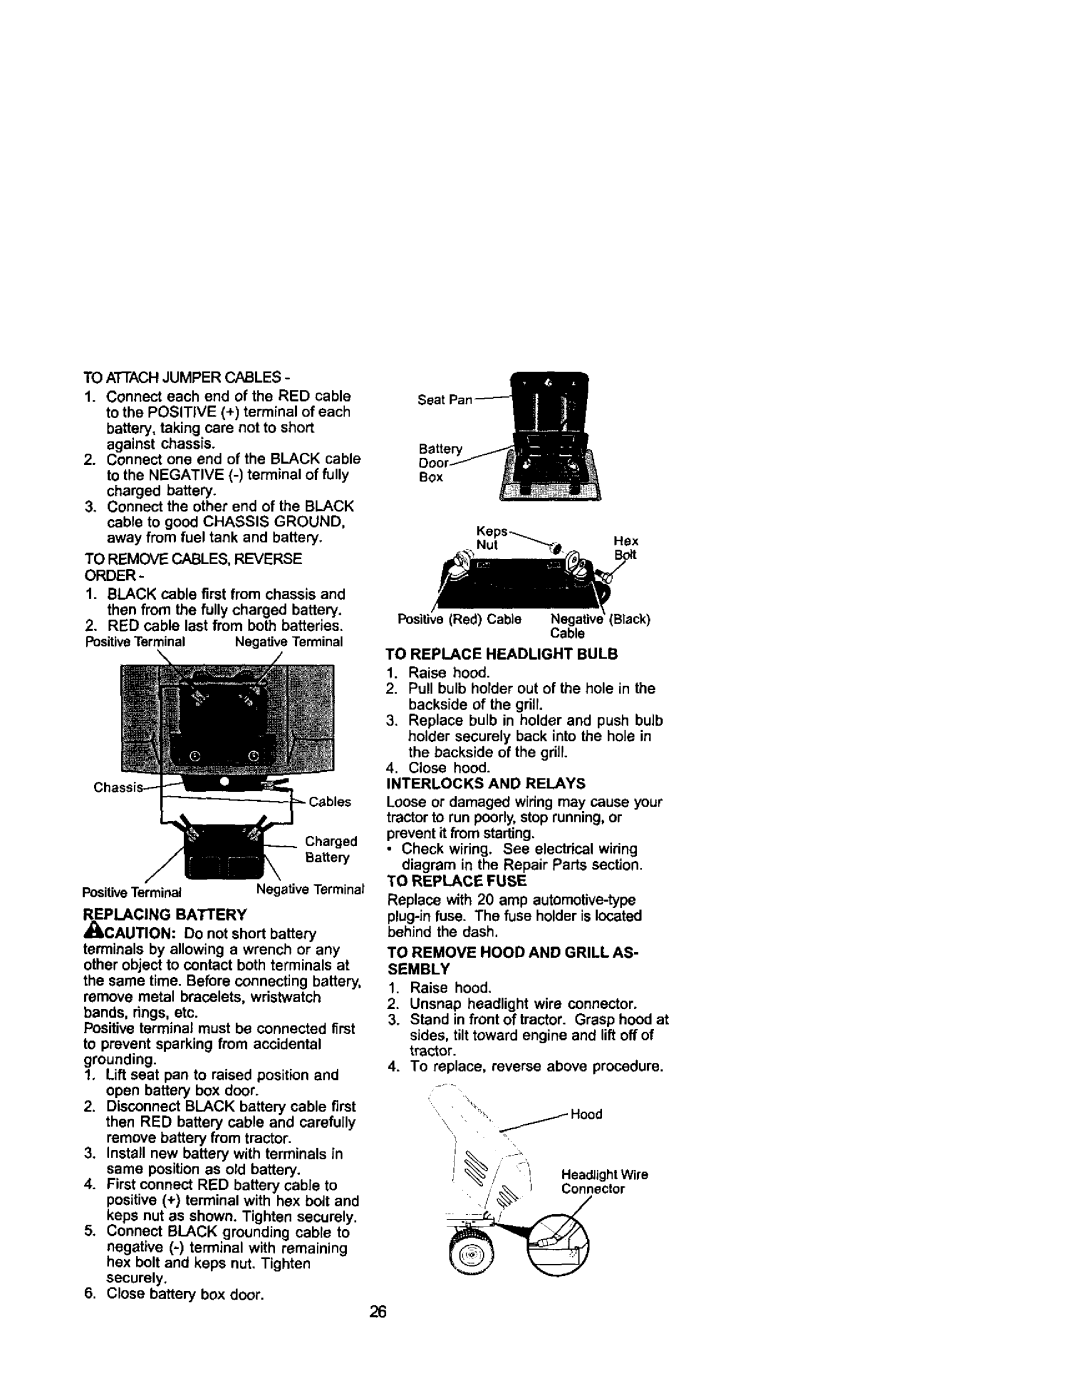 Craftsman 917.271742 owner manual To Remove Cables, Reverse Order 